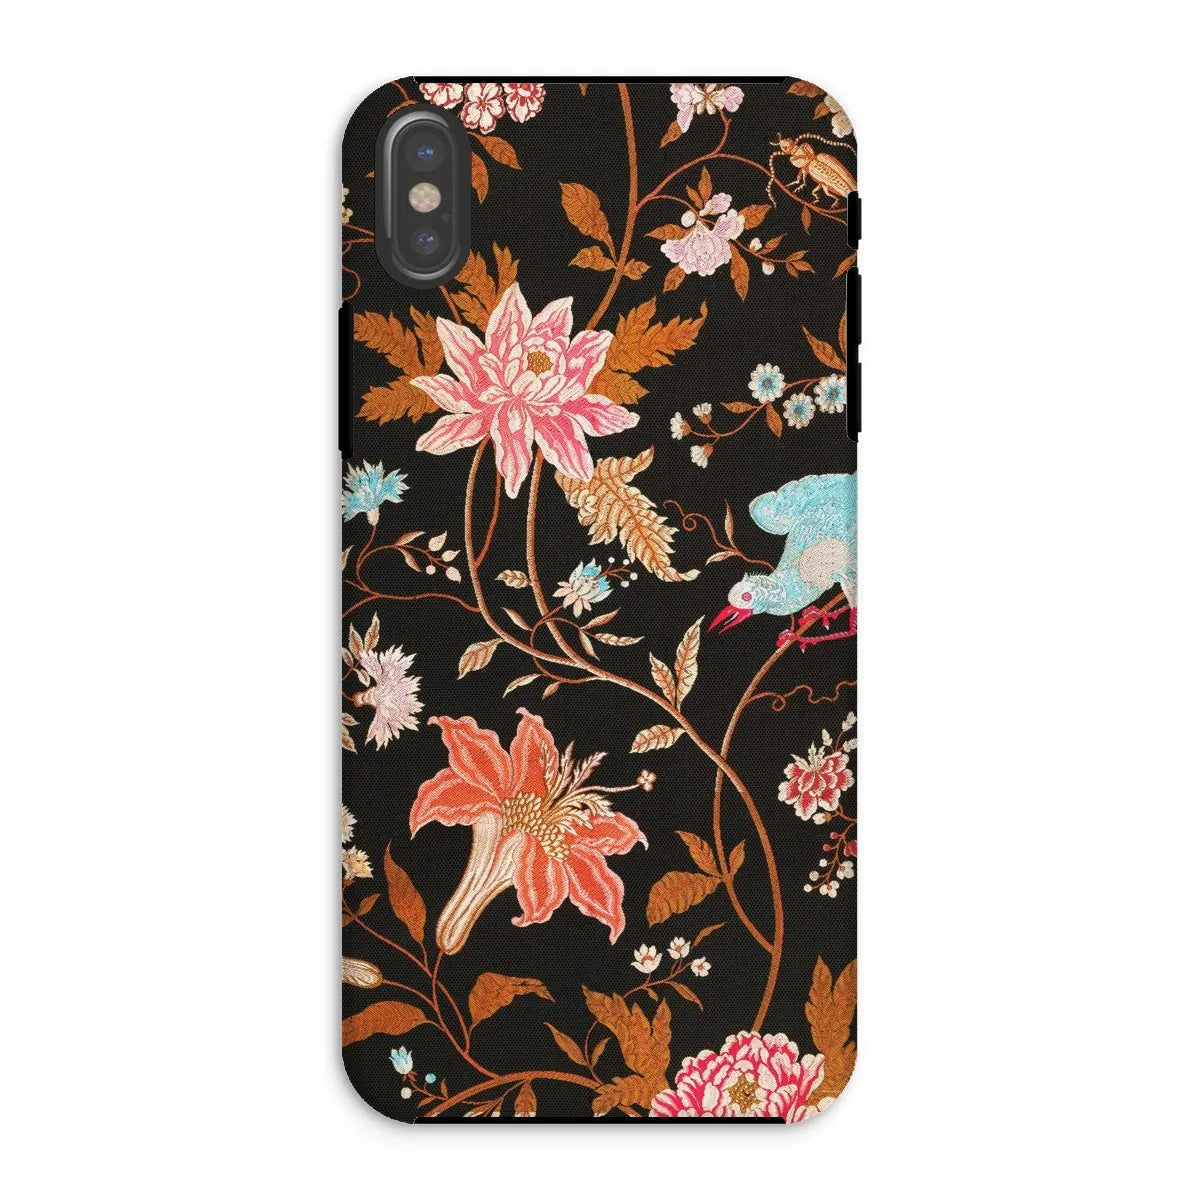 Midnight Call - Indian Aesthetic Fabric Art Phone Case - Iphone Xs / Matte - Mobile Phone Cases - Aesthetic Art